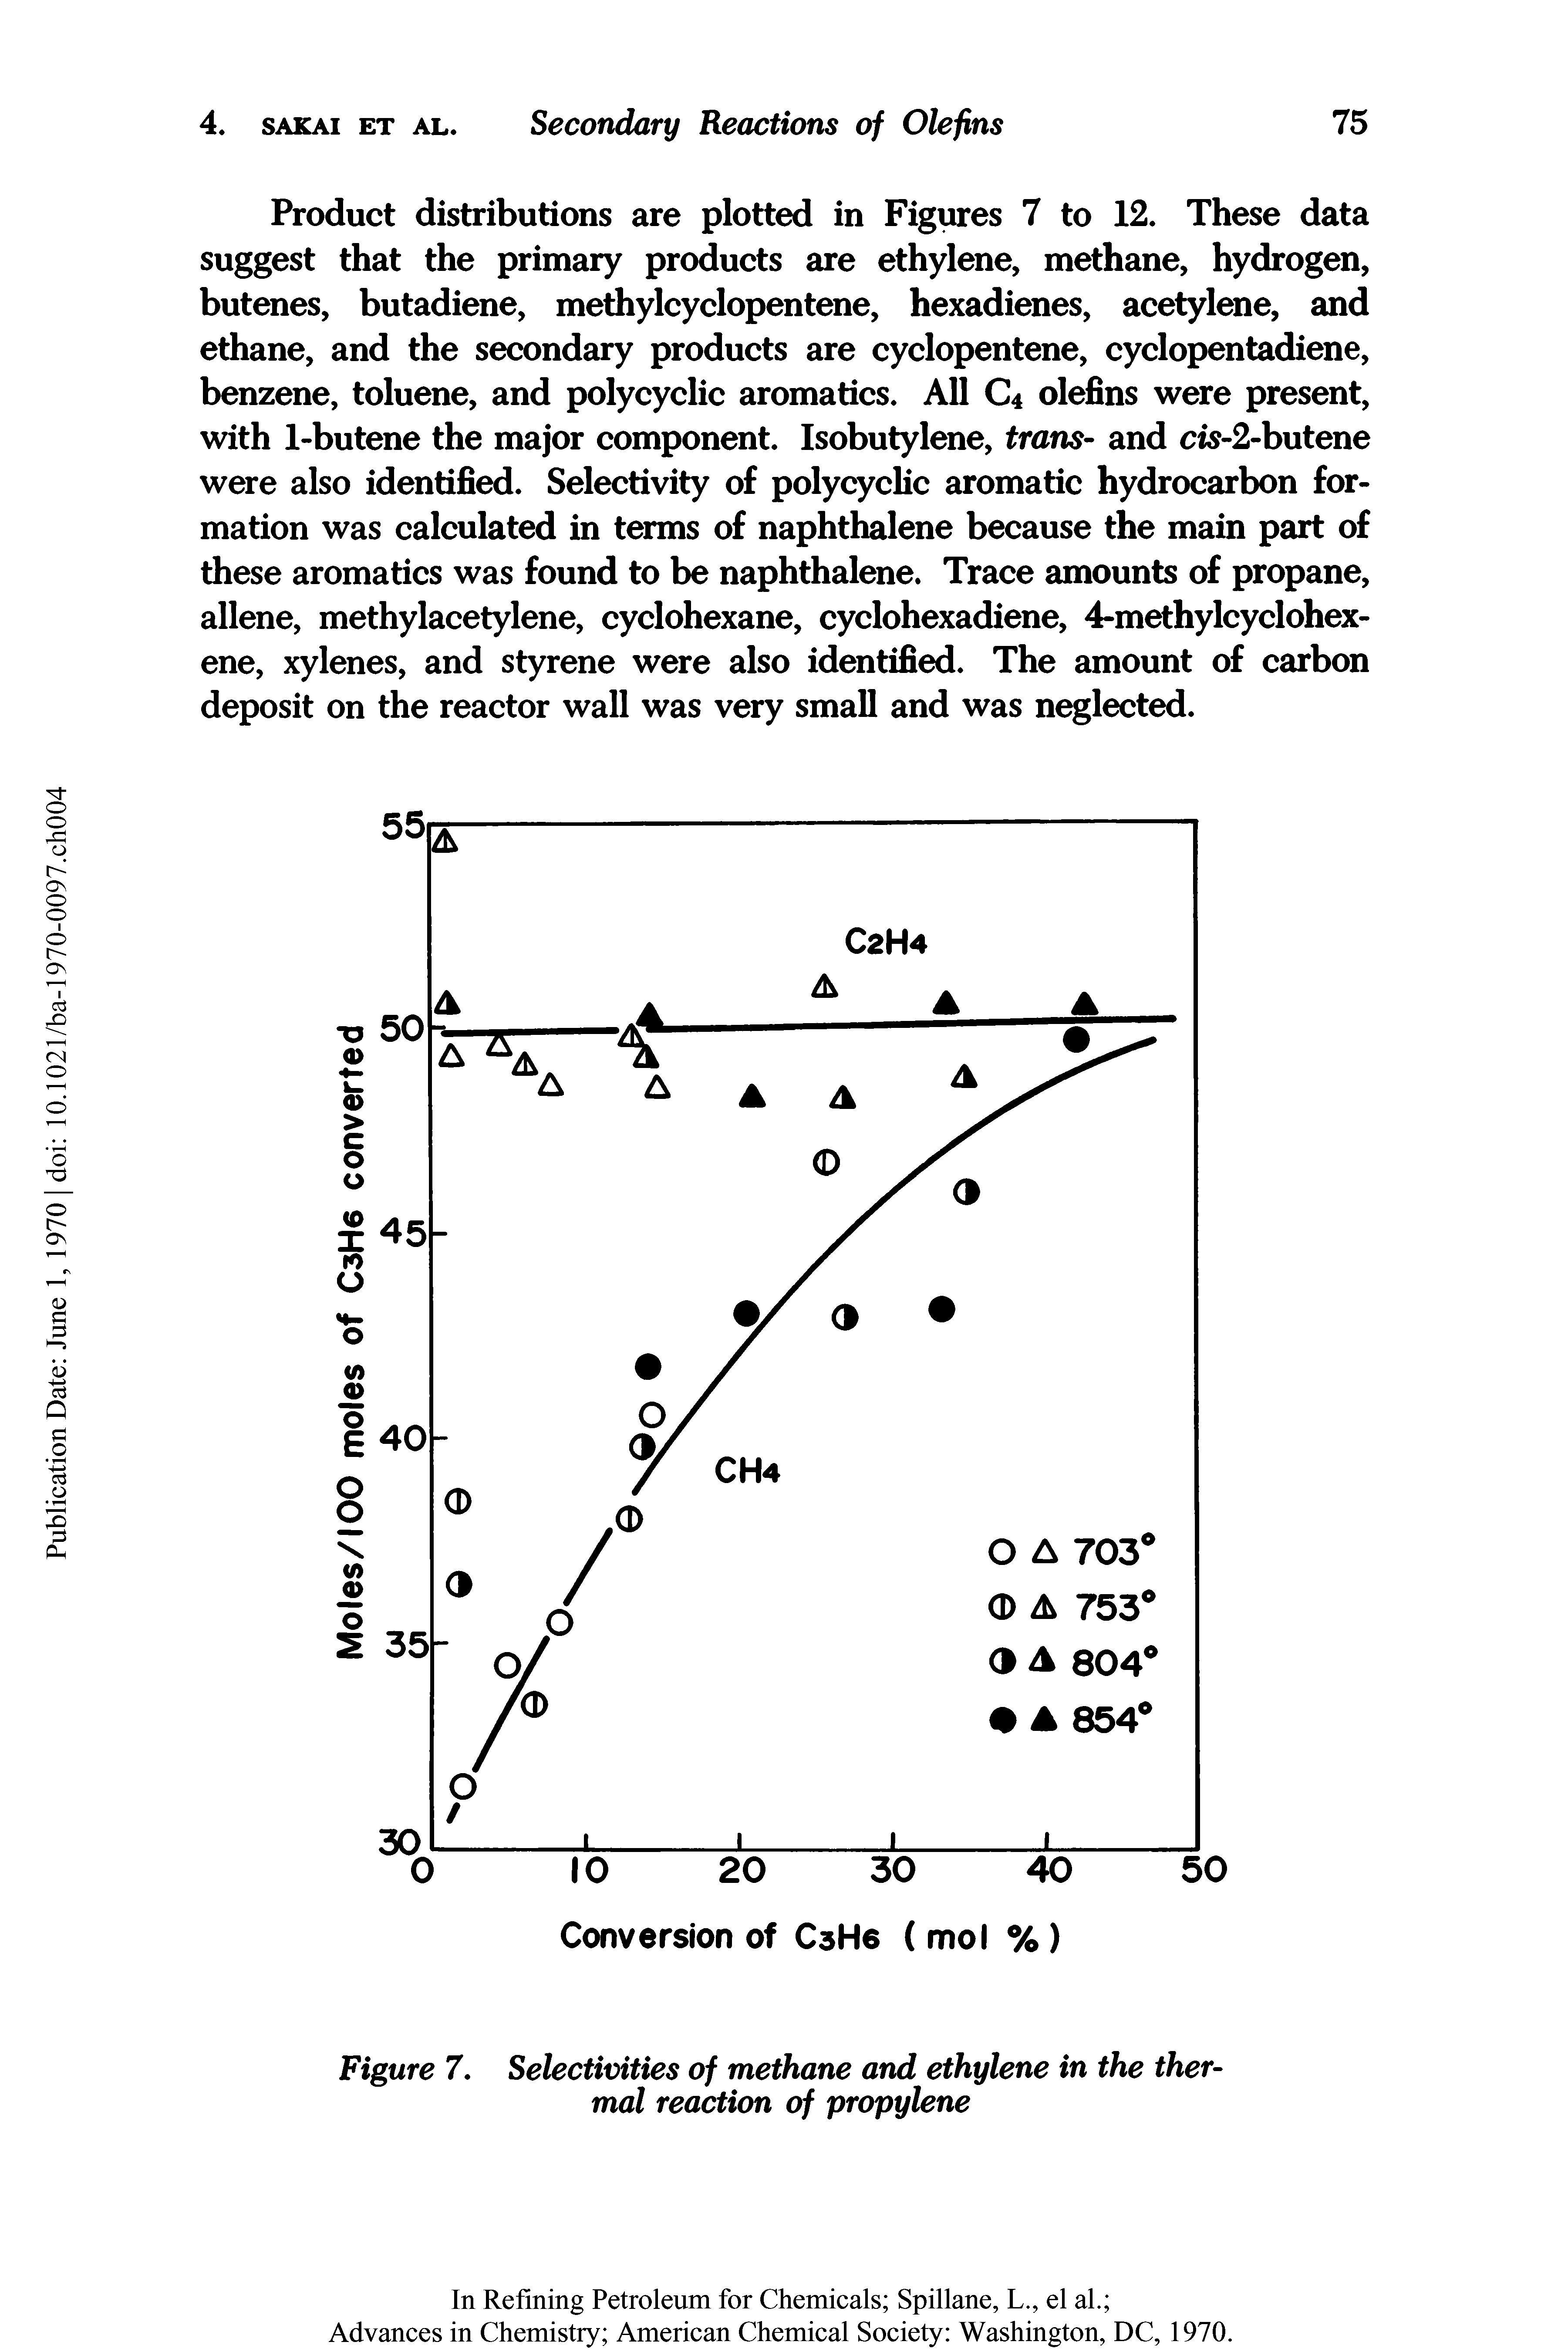 Figure 7. Selectivities of methane and ethylene in the thermal reaction of propylene...